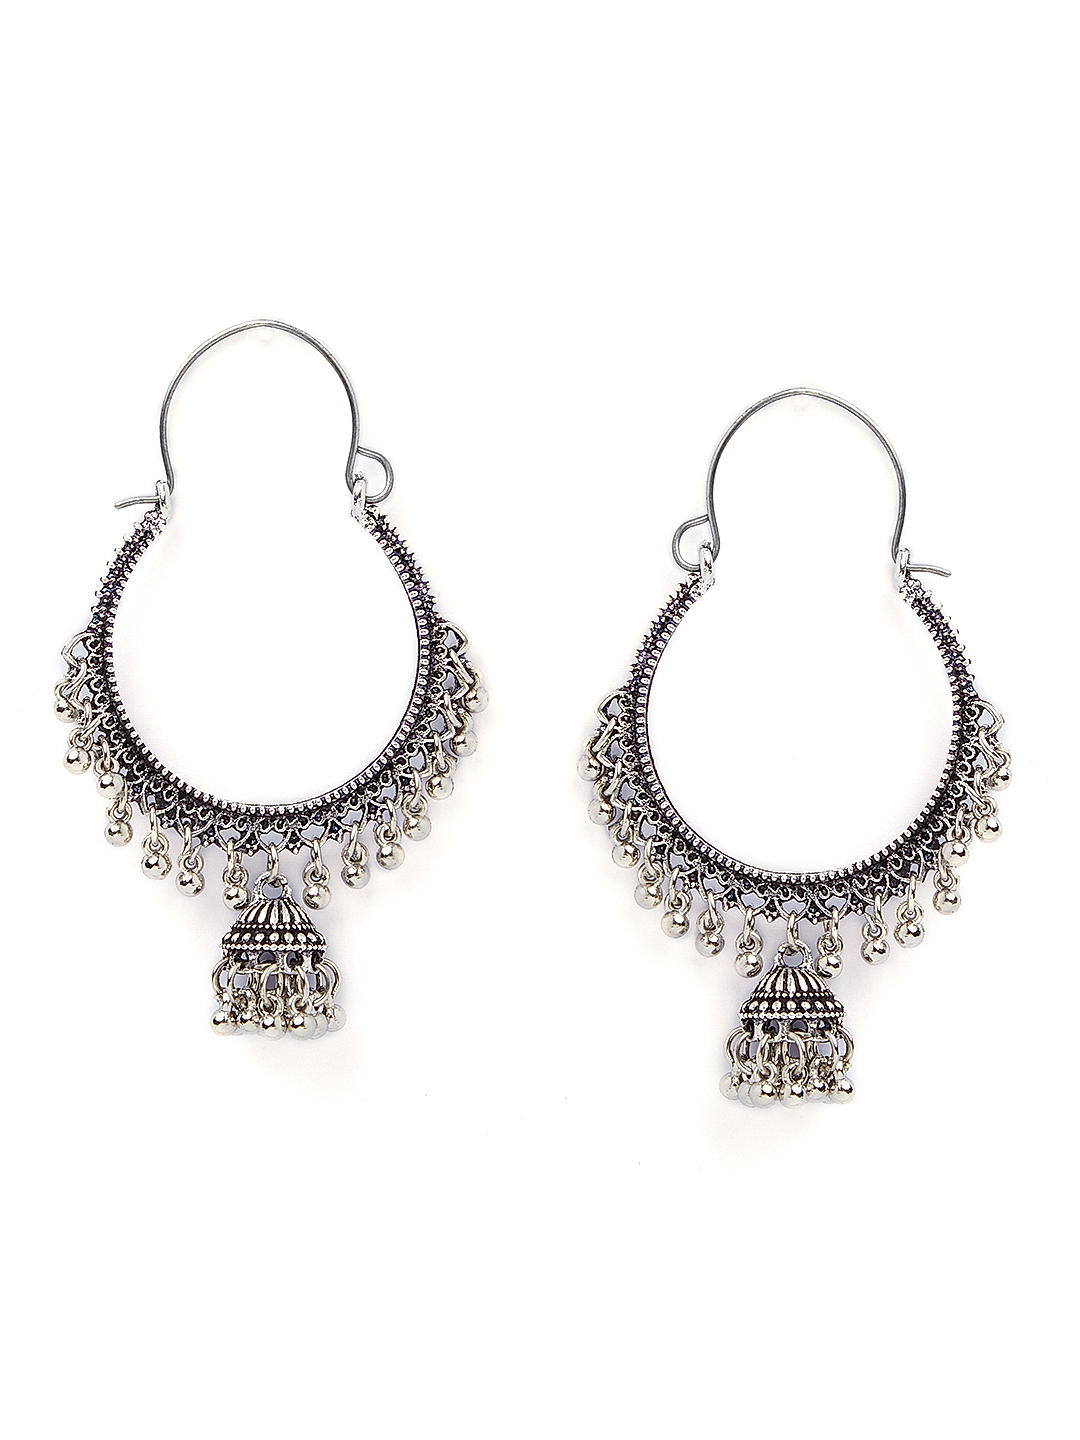 Accessorize London Womens Oversized Circle Pearl Drop Earring Buy  Accessorize London Womens Oversized Circle Pearl Drop Earring Online at  Best Price in India  Nykaa